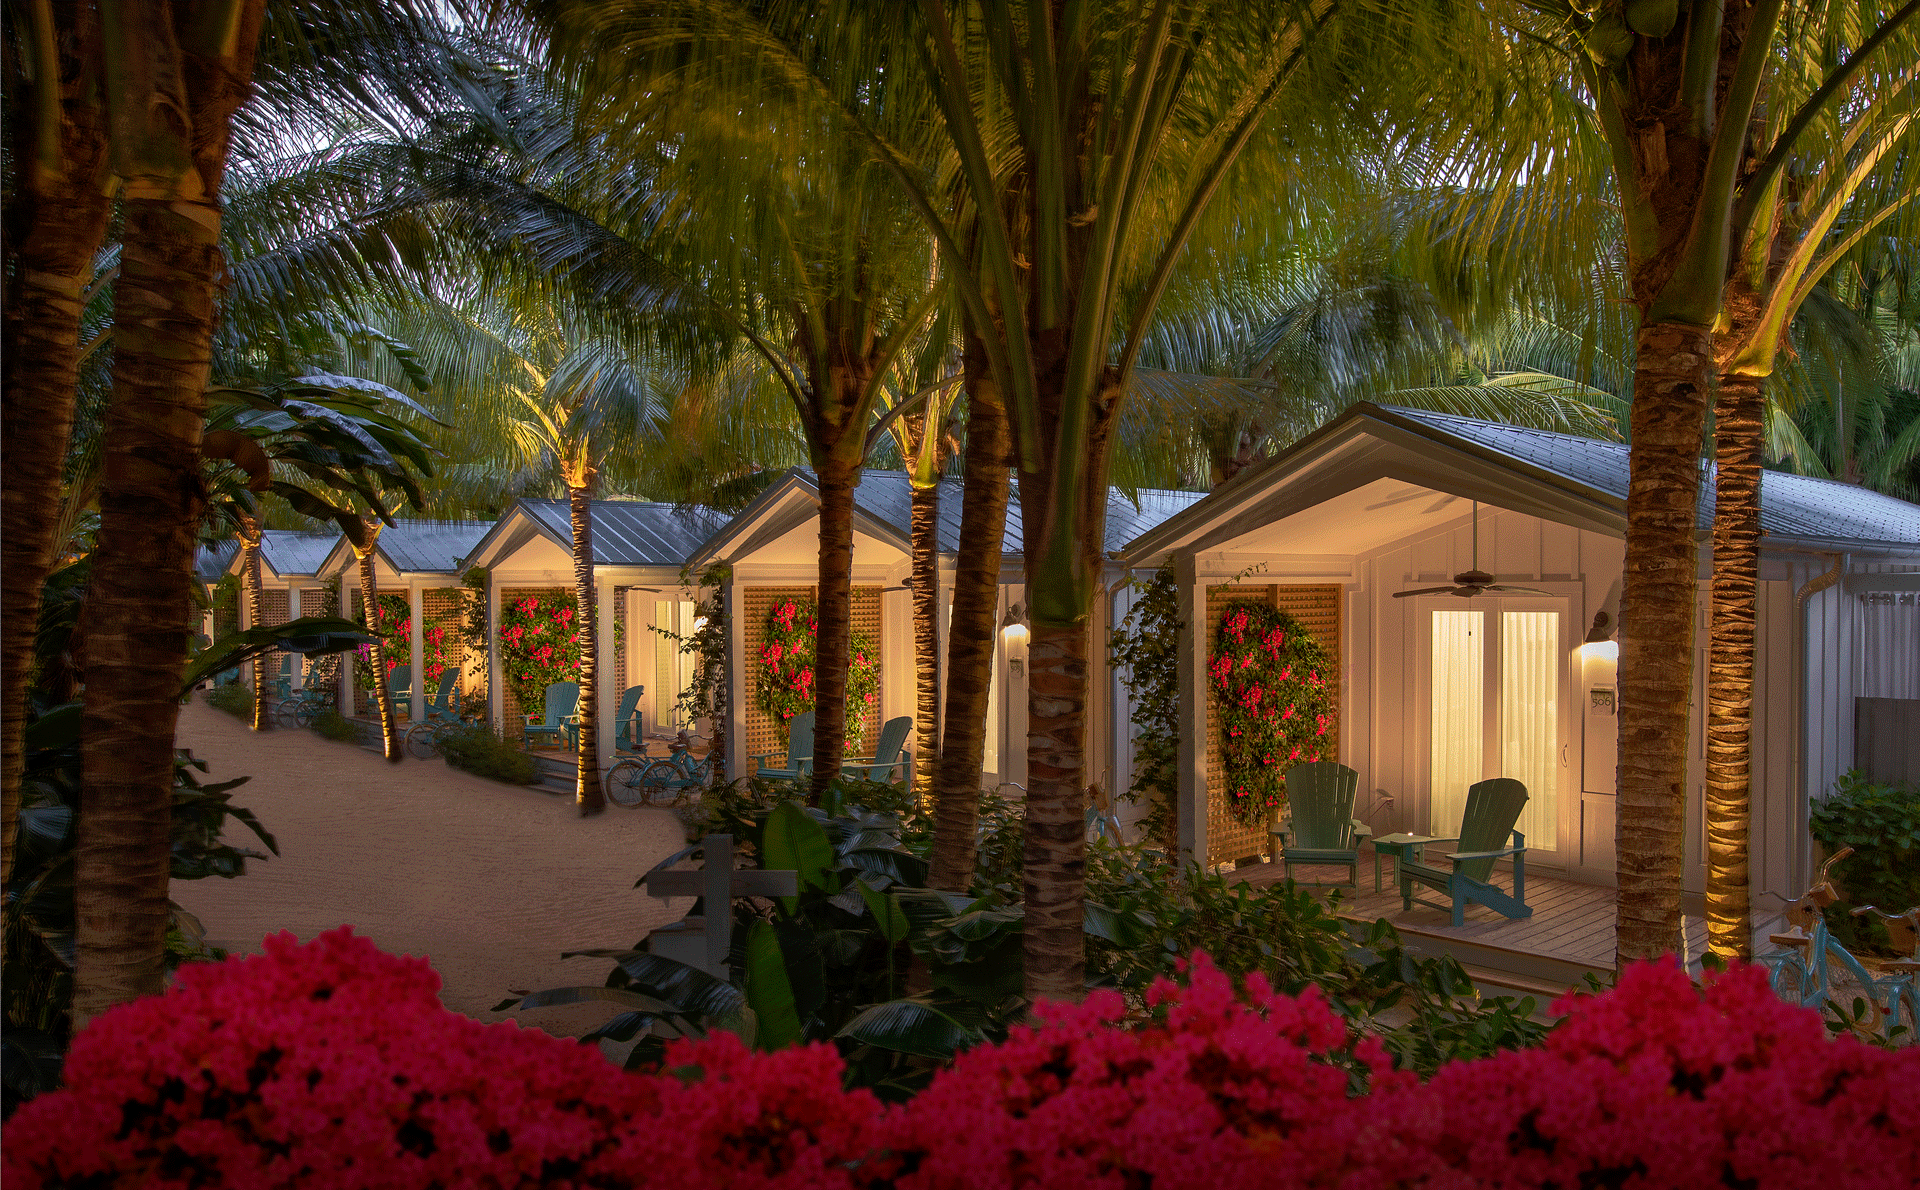 exterior image of bungalows at night with palm trees and flowers